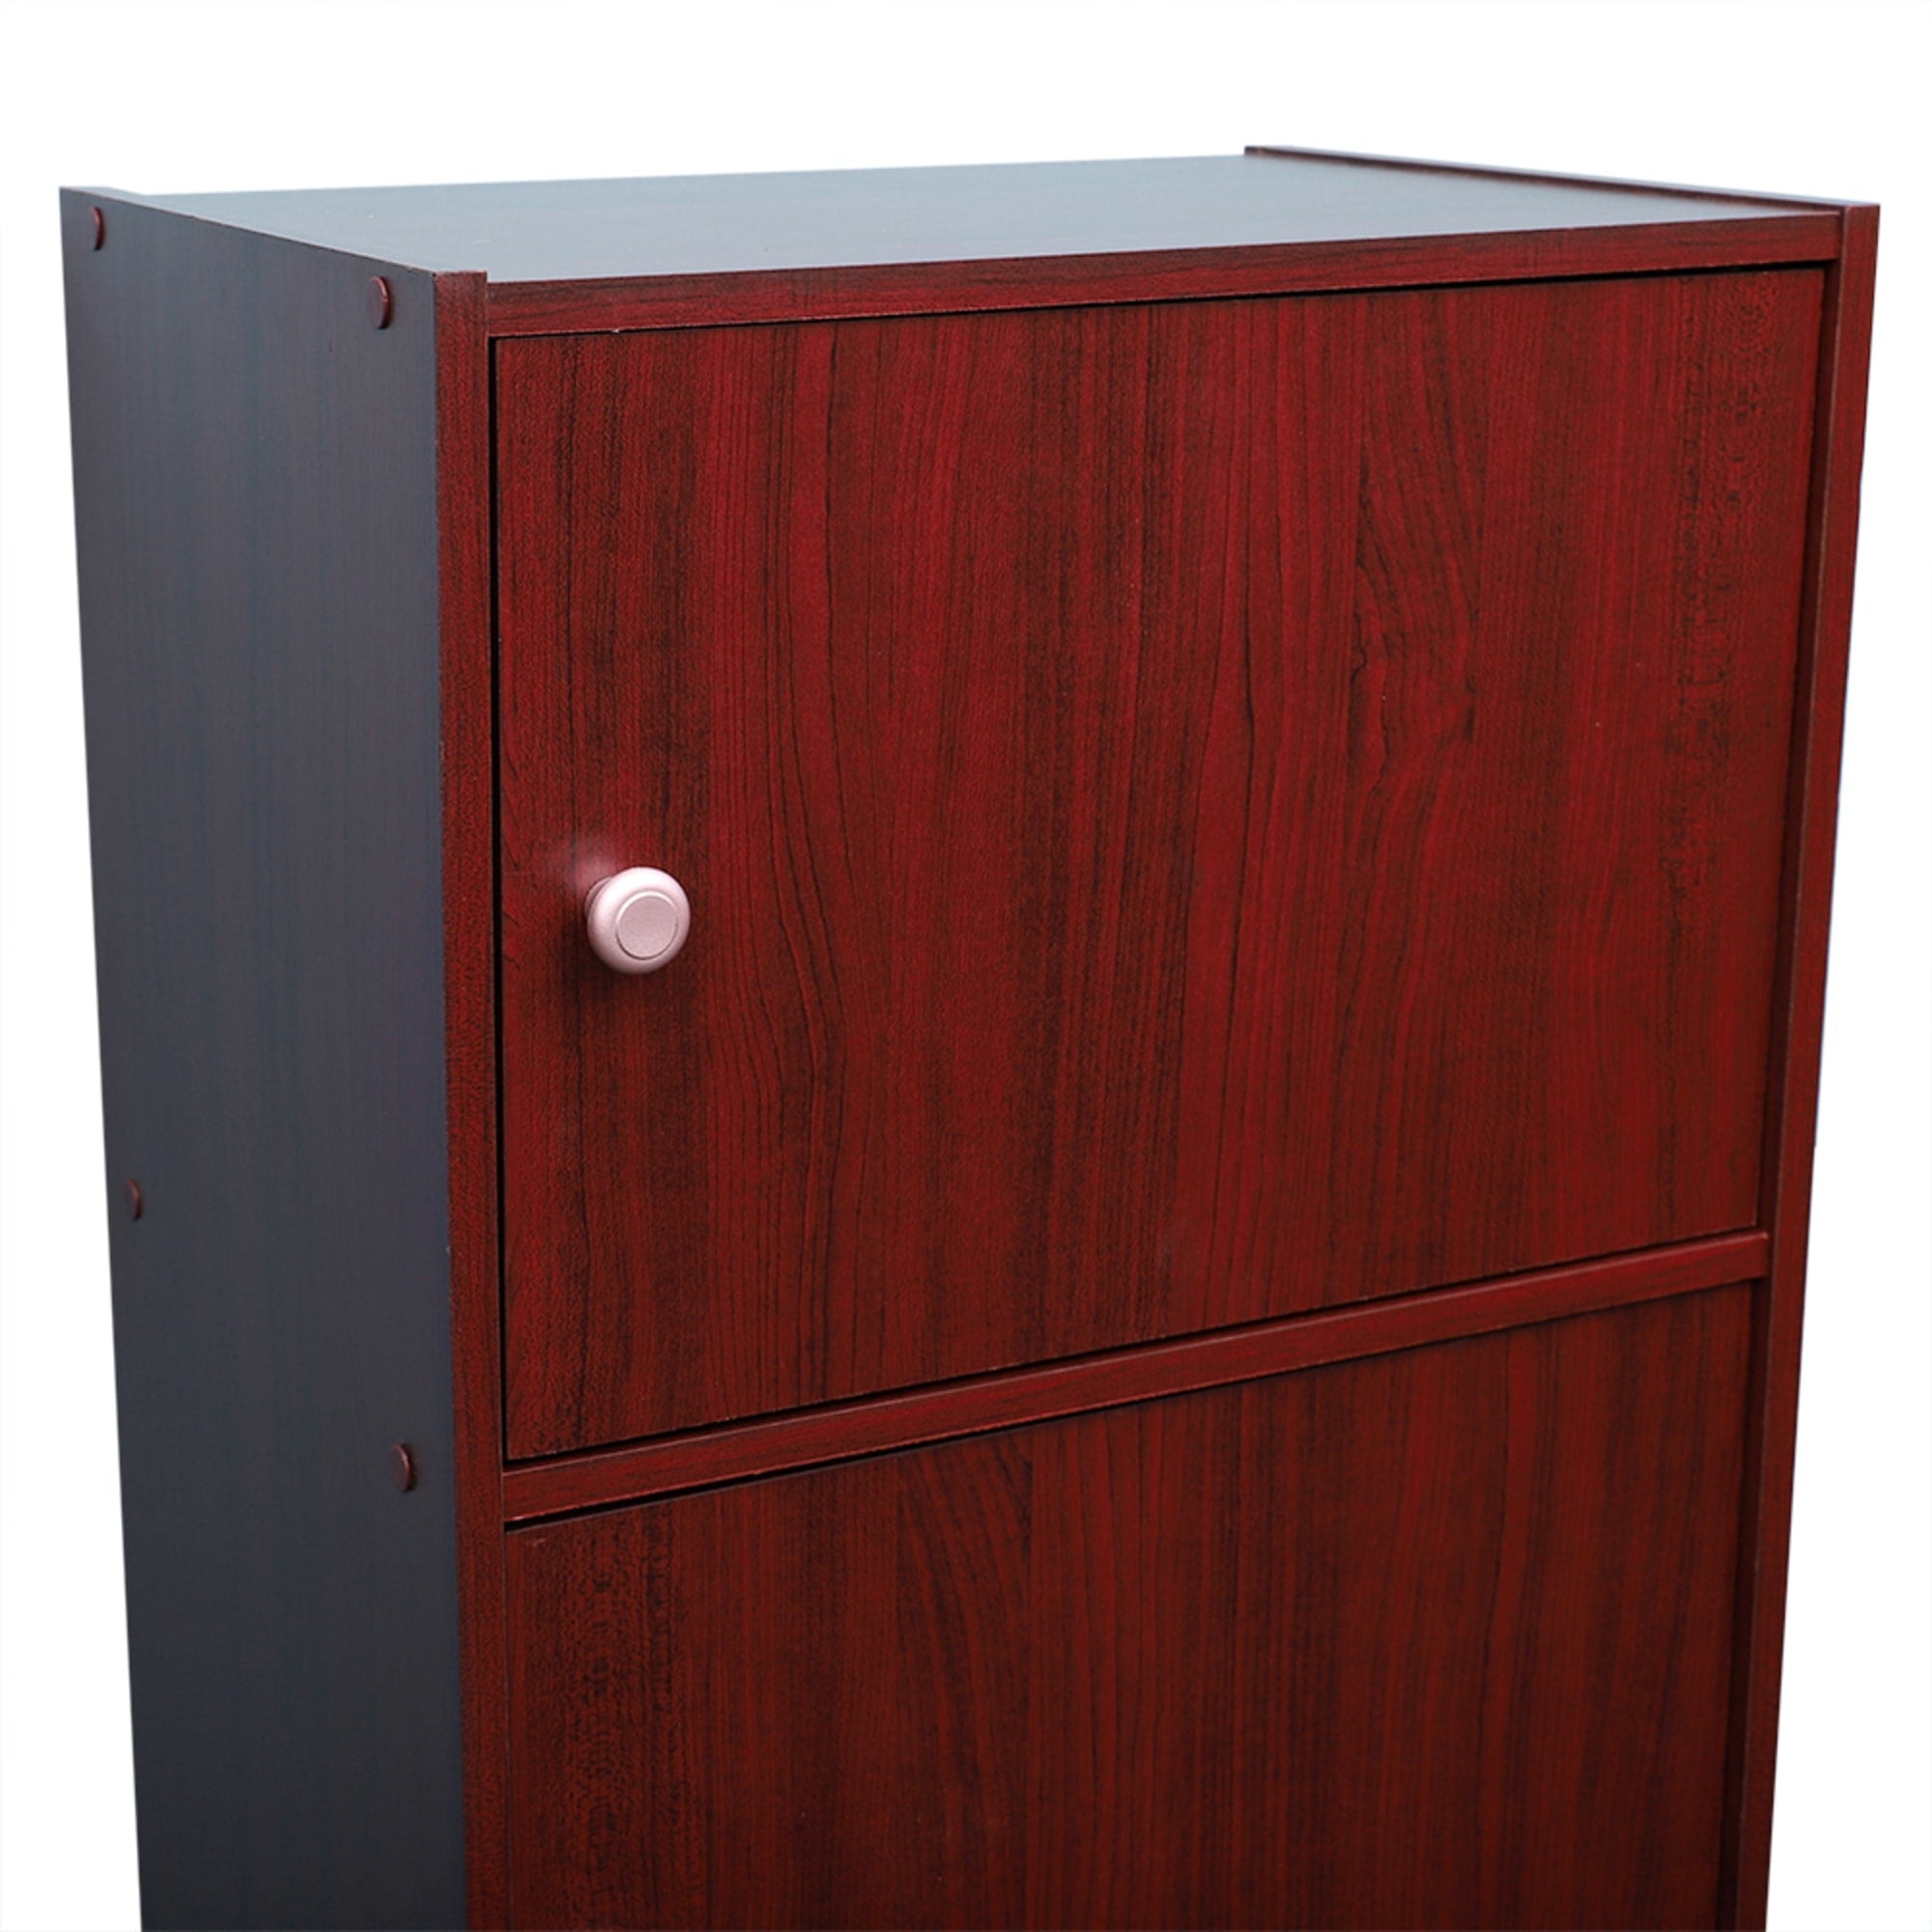 Home Basics 3 Cube Cabinet, Mahogany $50.00 EACH, CASE PACK OF 1